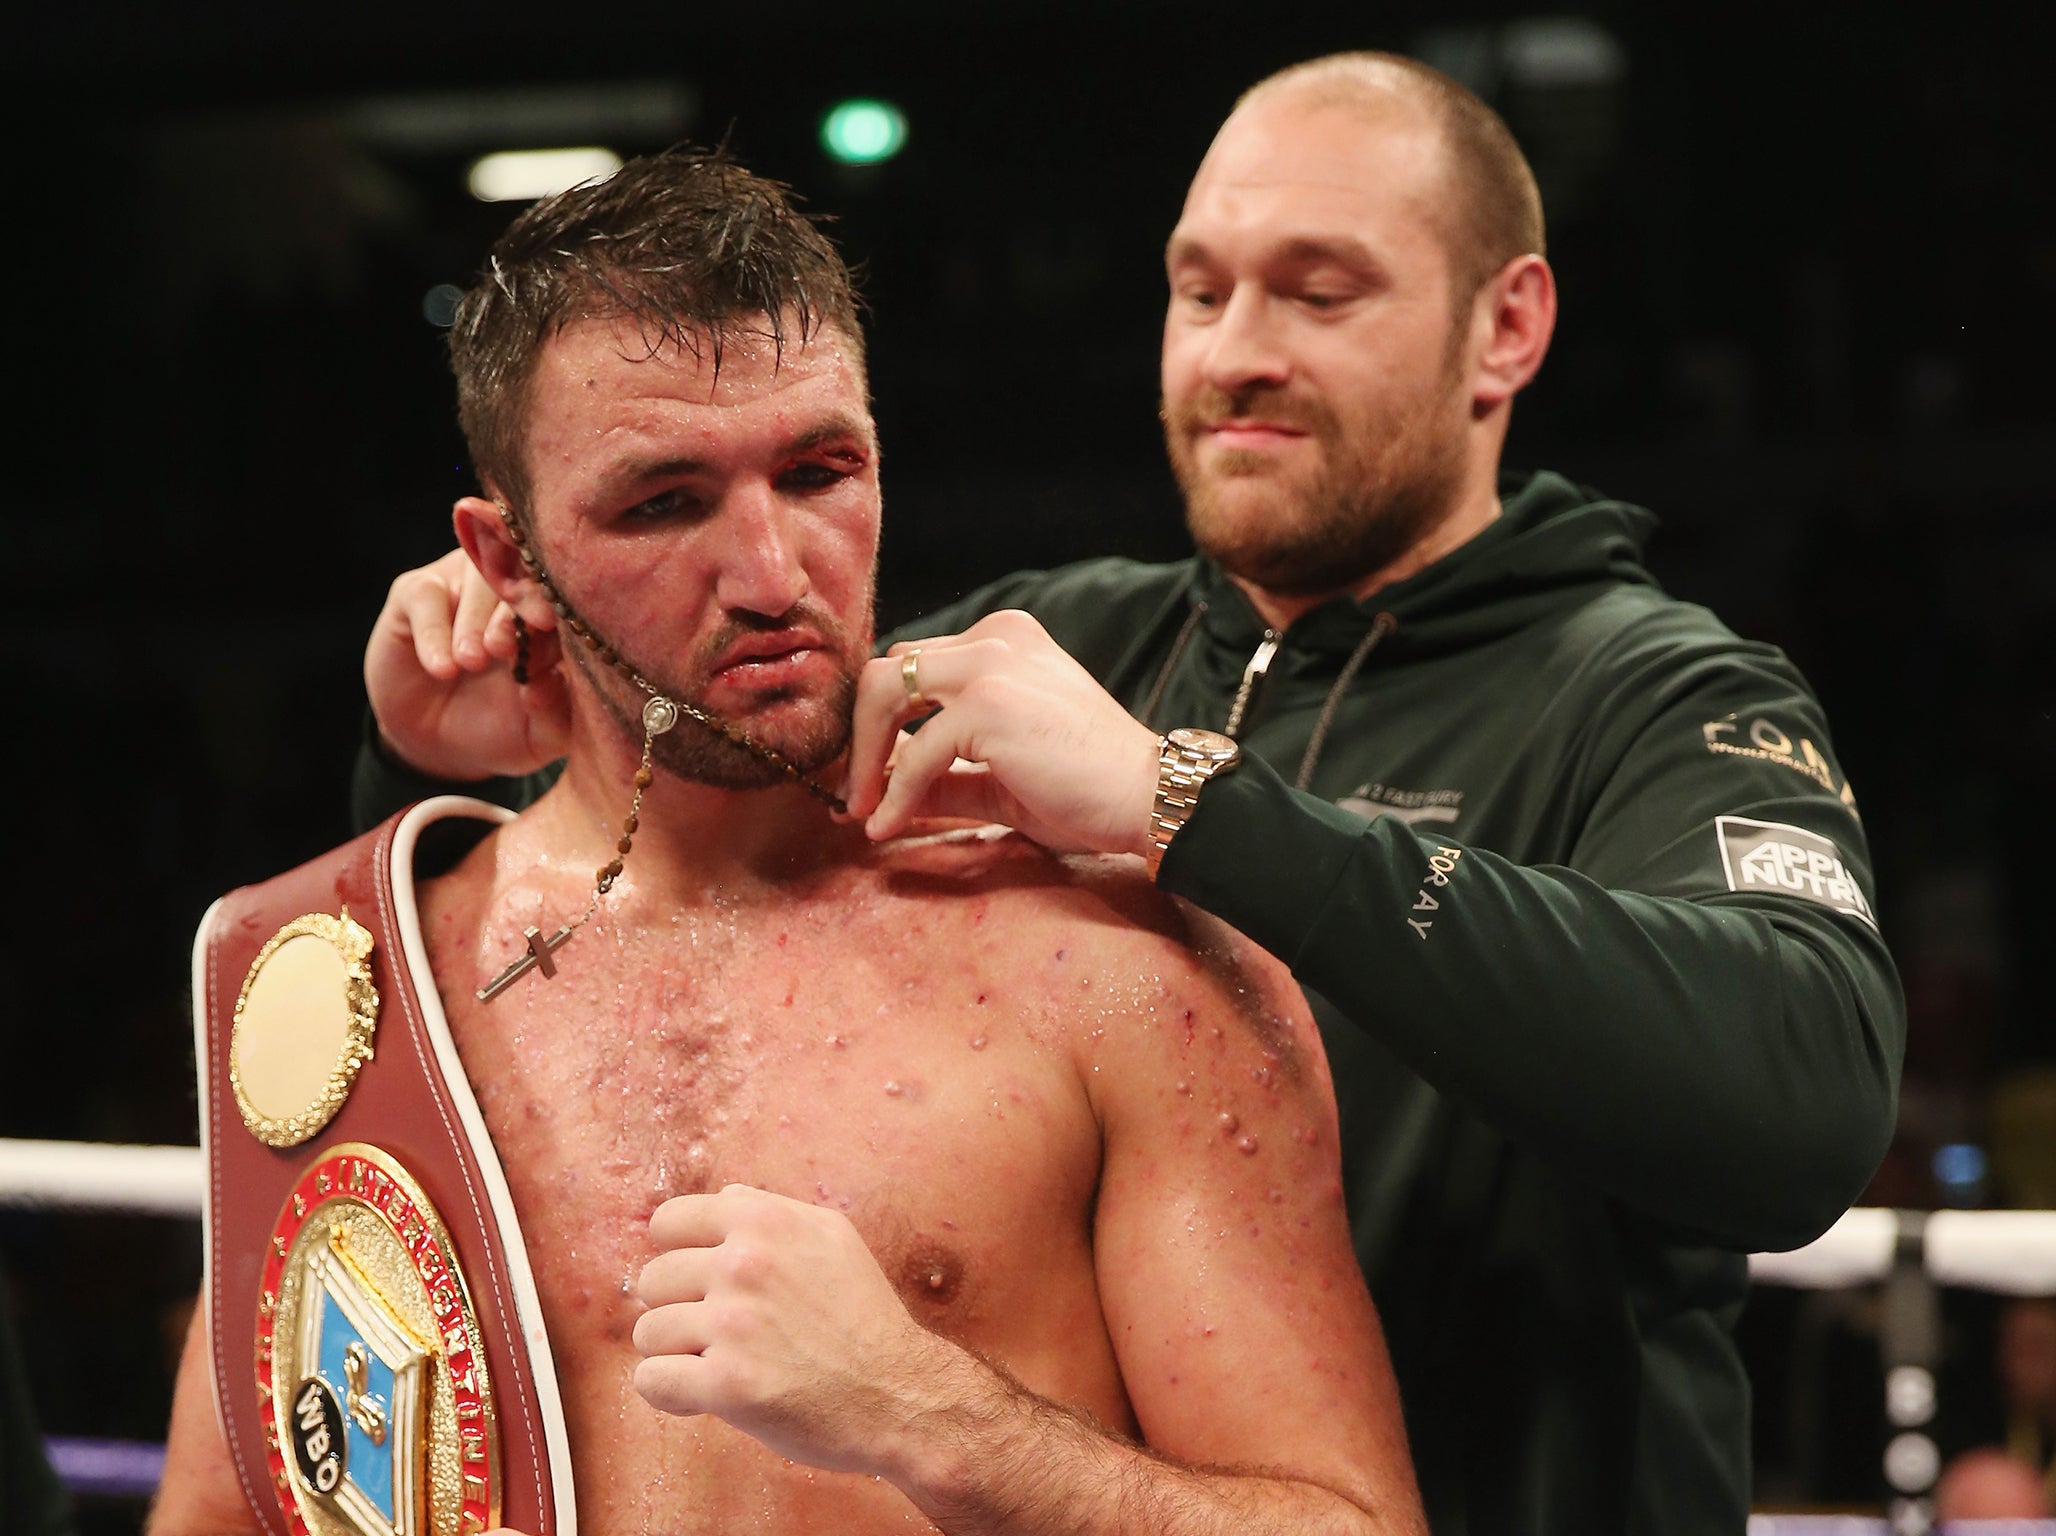 Both Tyson and Hughie Fury tested positive for nandrolone